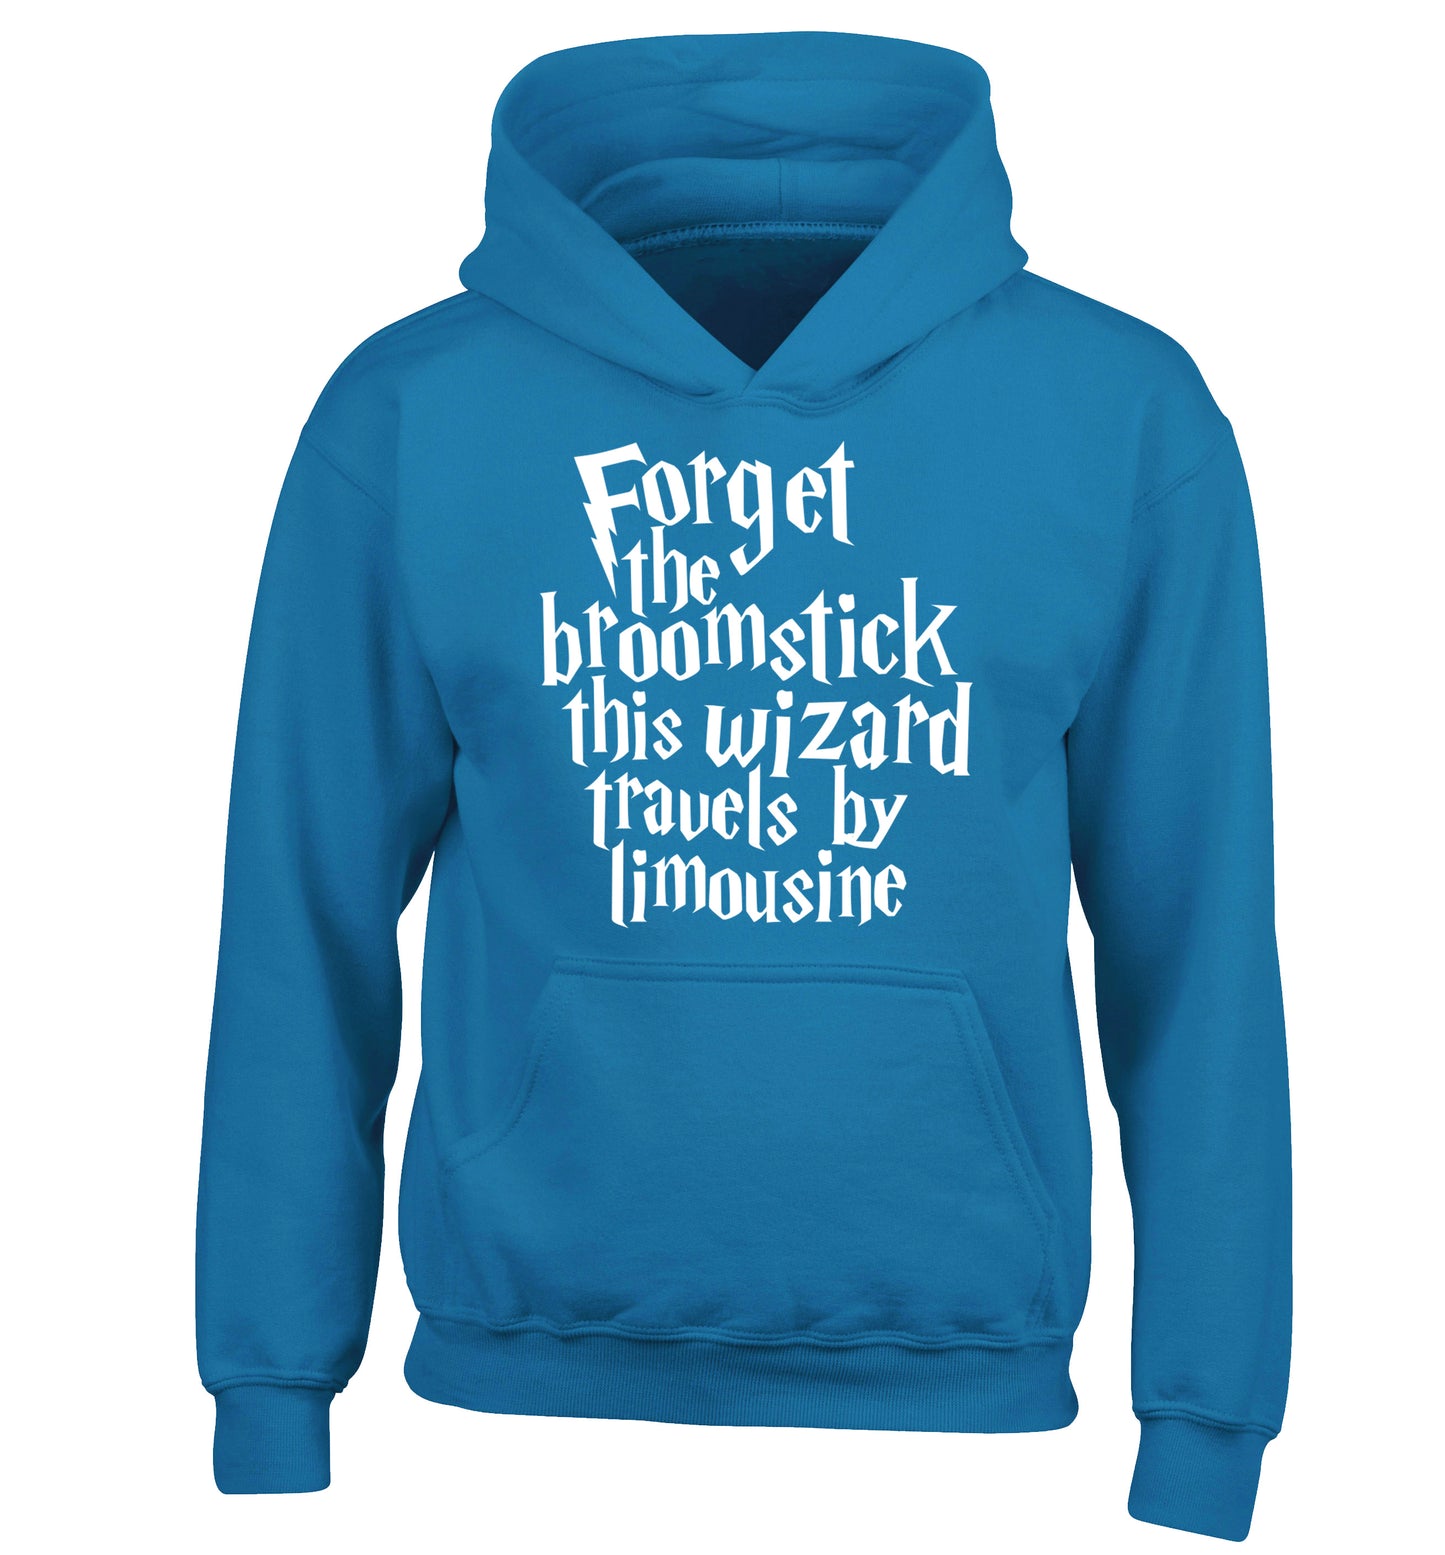 Forget the broomstick this wizard travels by limousine children's blue hoodie 12-14 Years